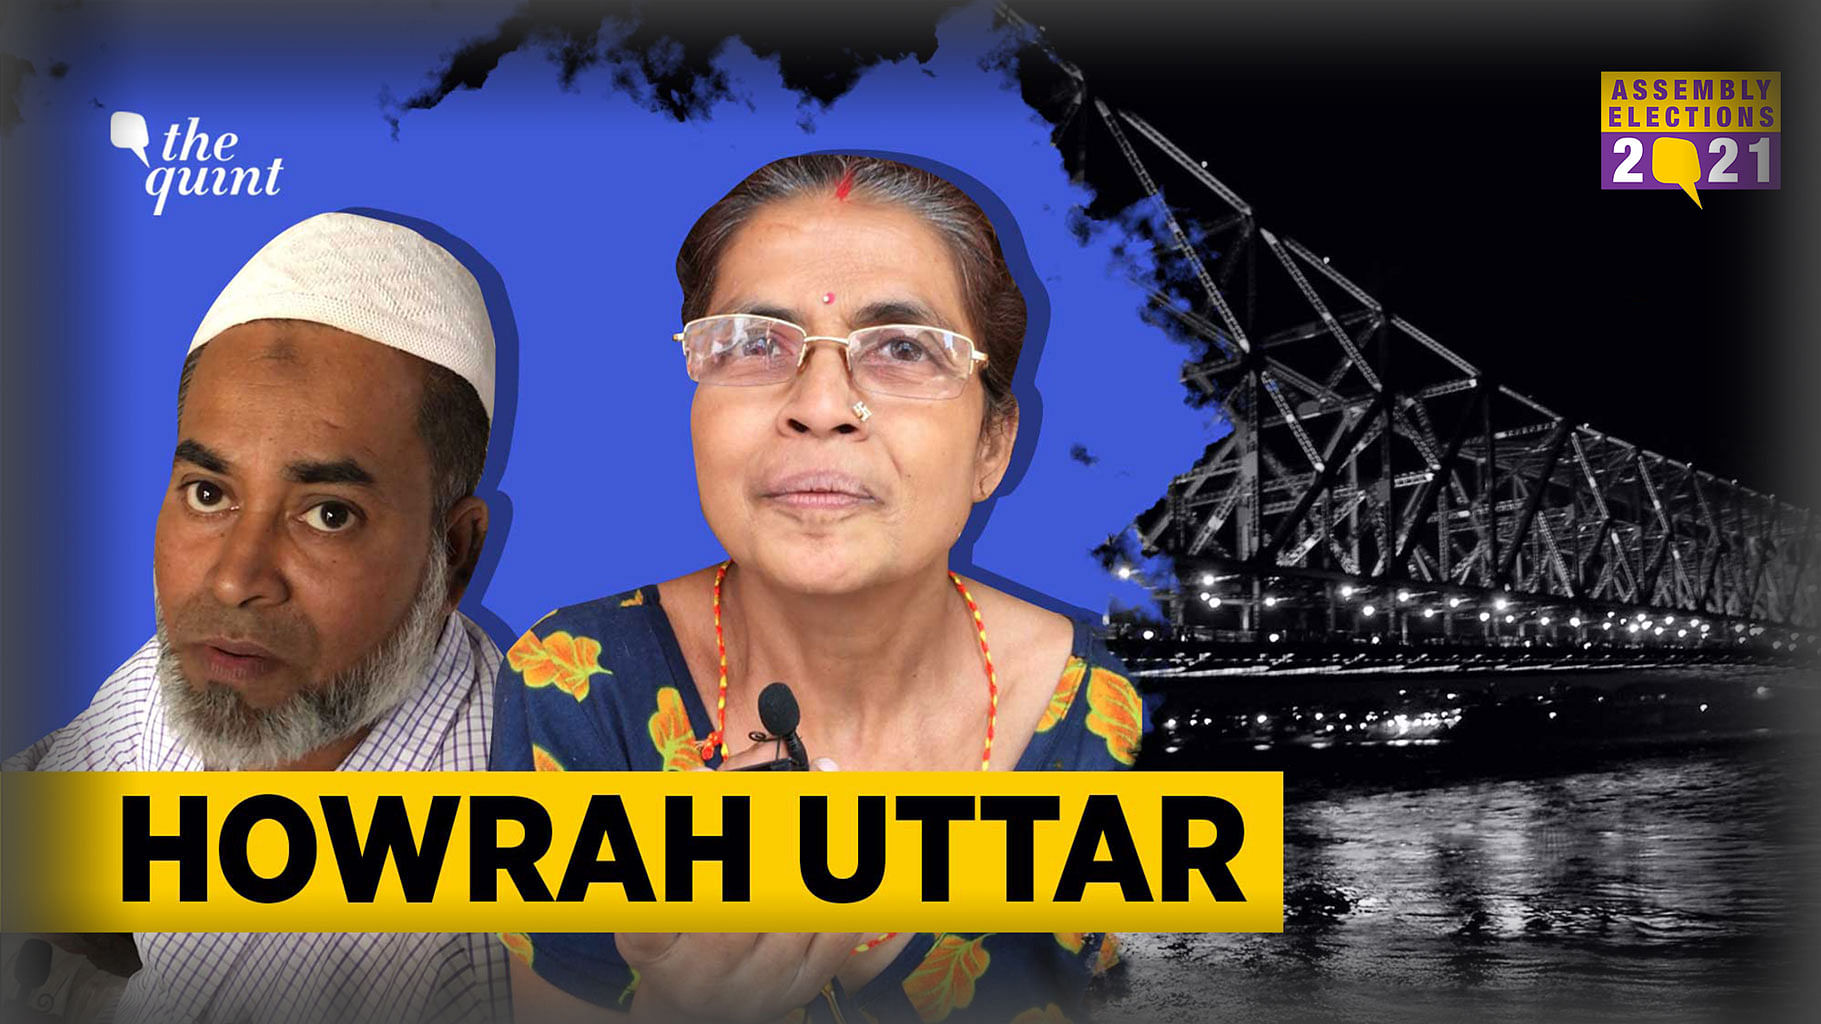 Bengal Elections 2021: Howrah Uttar’s People Say Jobs Not Religion